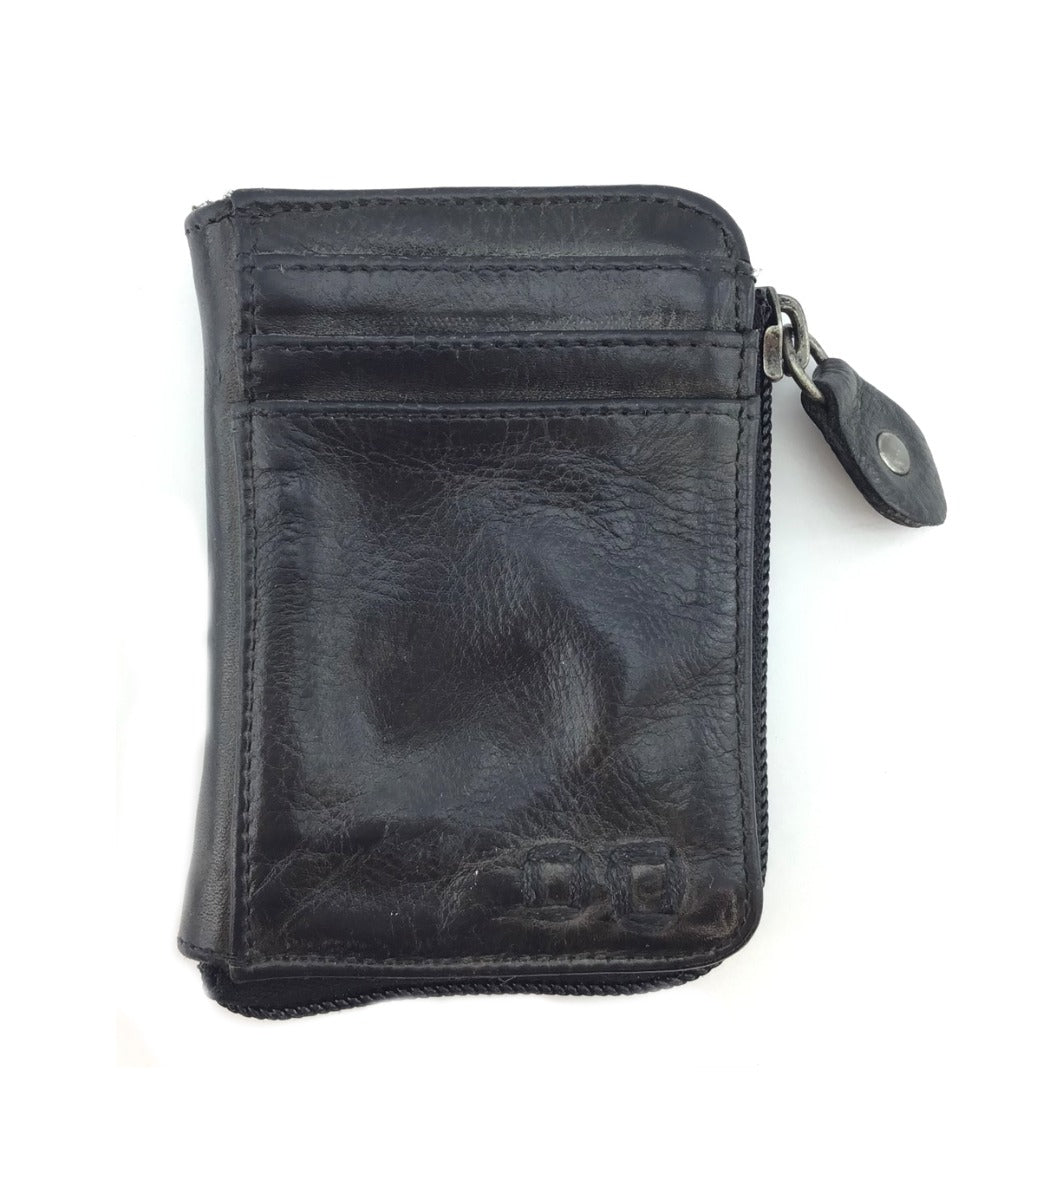 A black leather Carrie wallet with a zipper by Bed Stu.